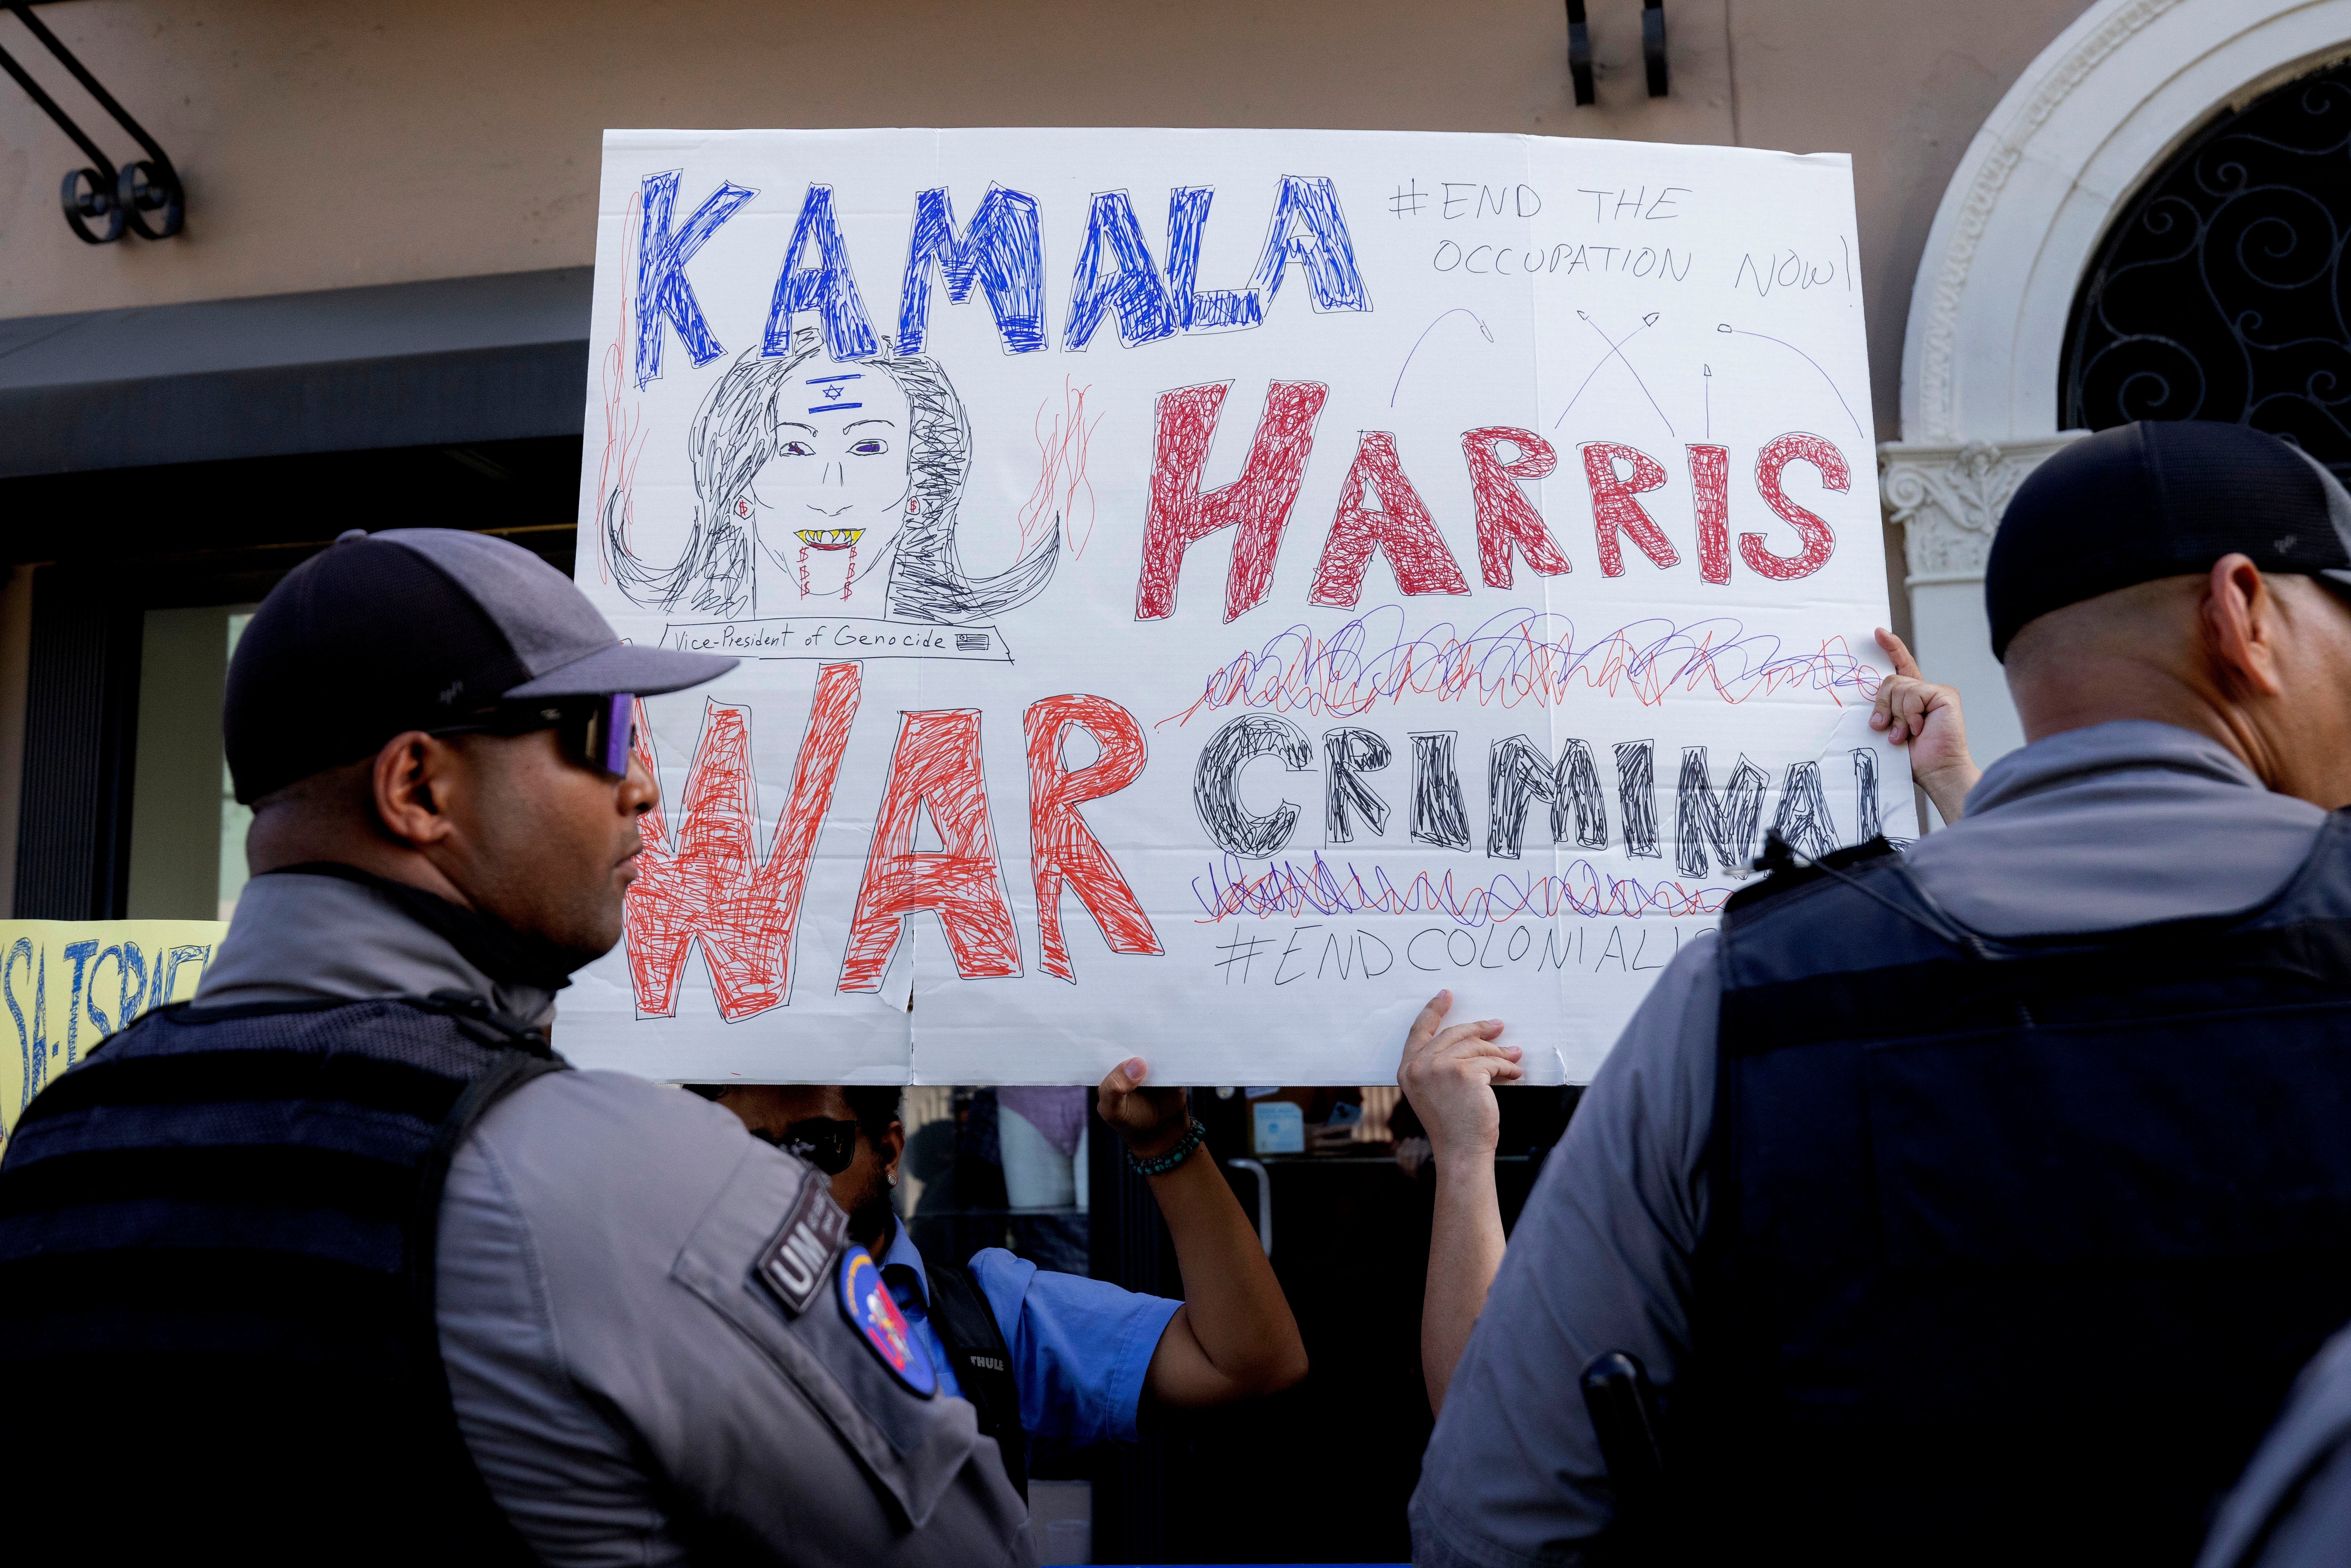 People protest outside the facility where Vice President Kamala Harris is holding a meeting, in San Juan, Puerto Rico